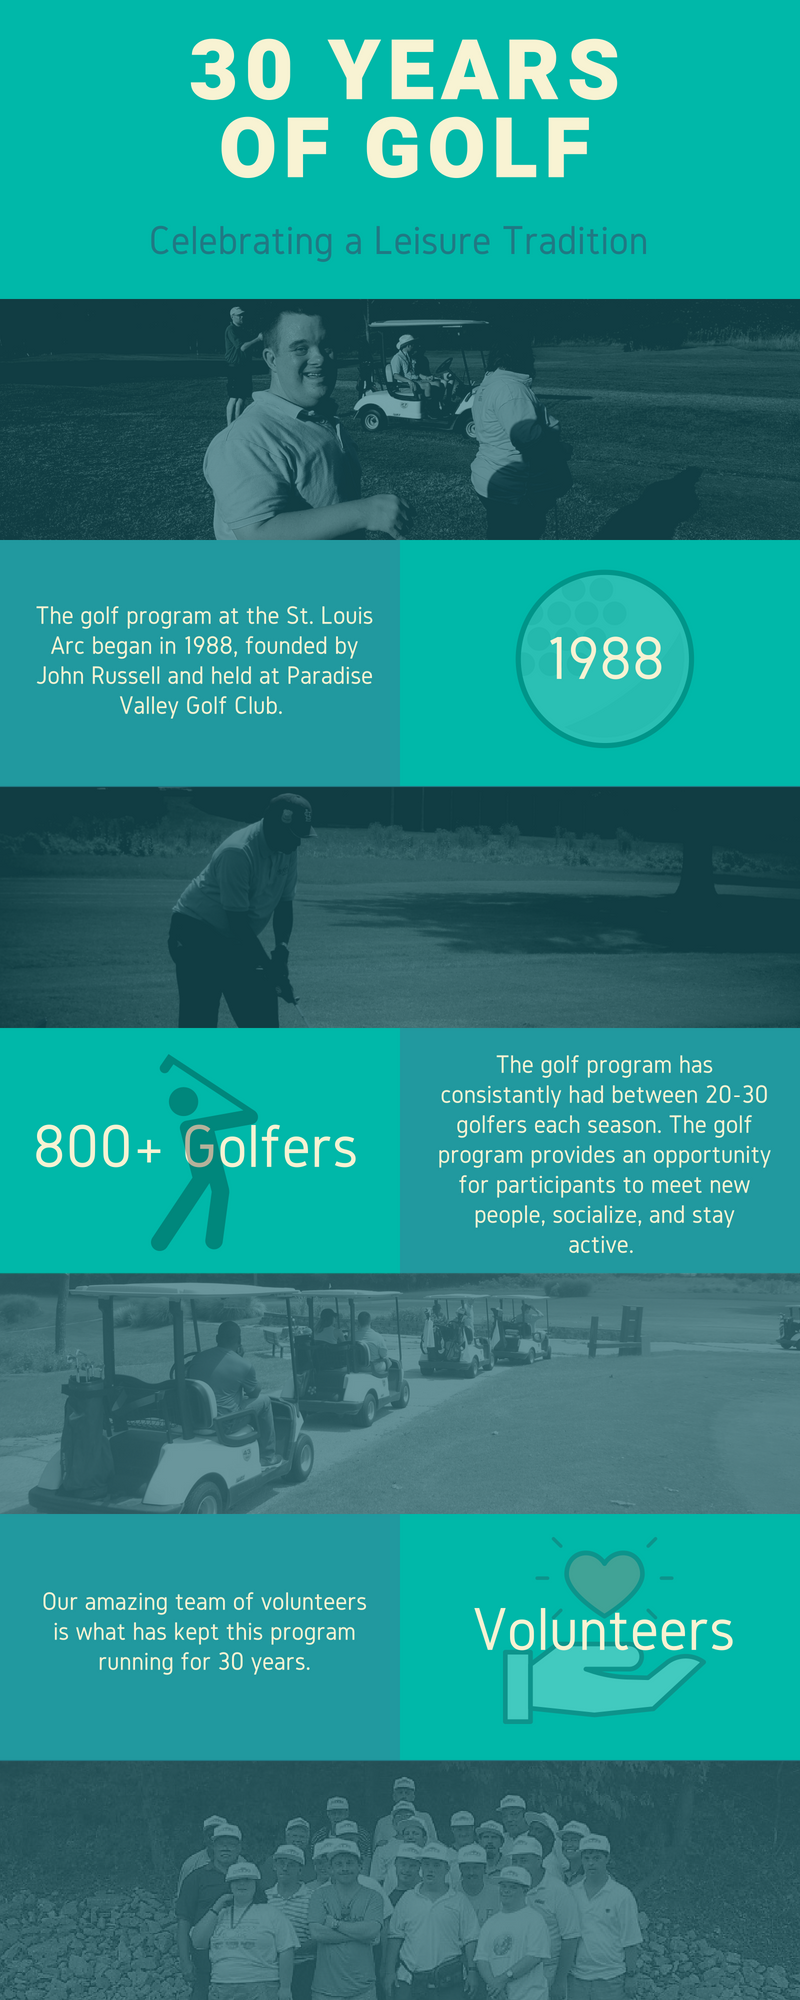 Infographic celebrating 30 years of golf